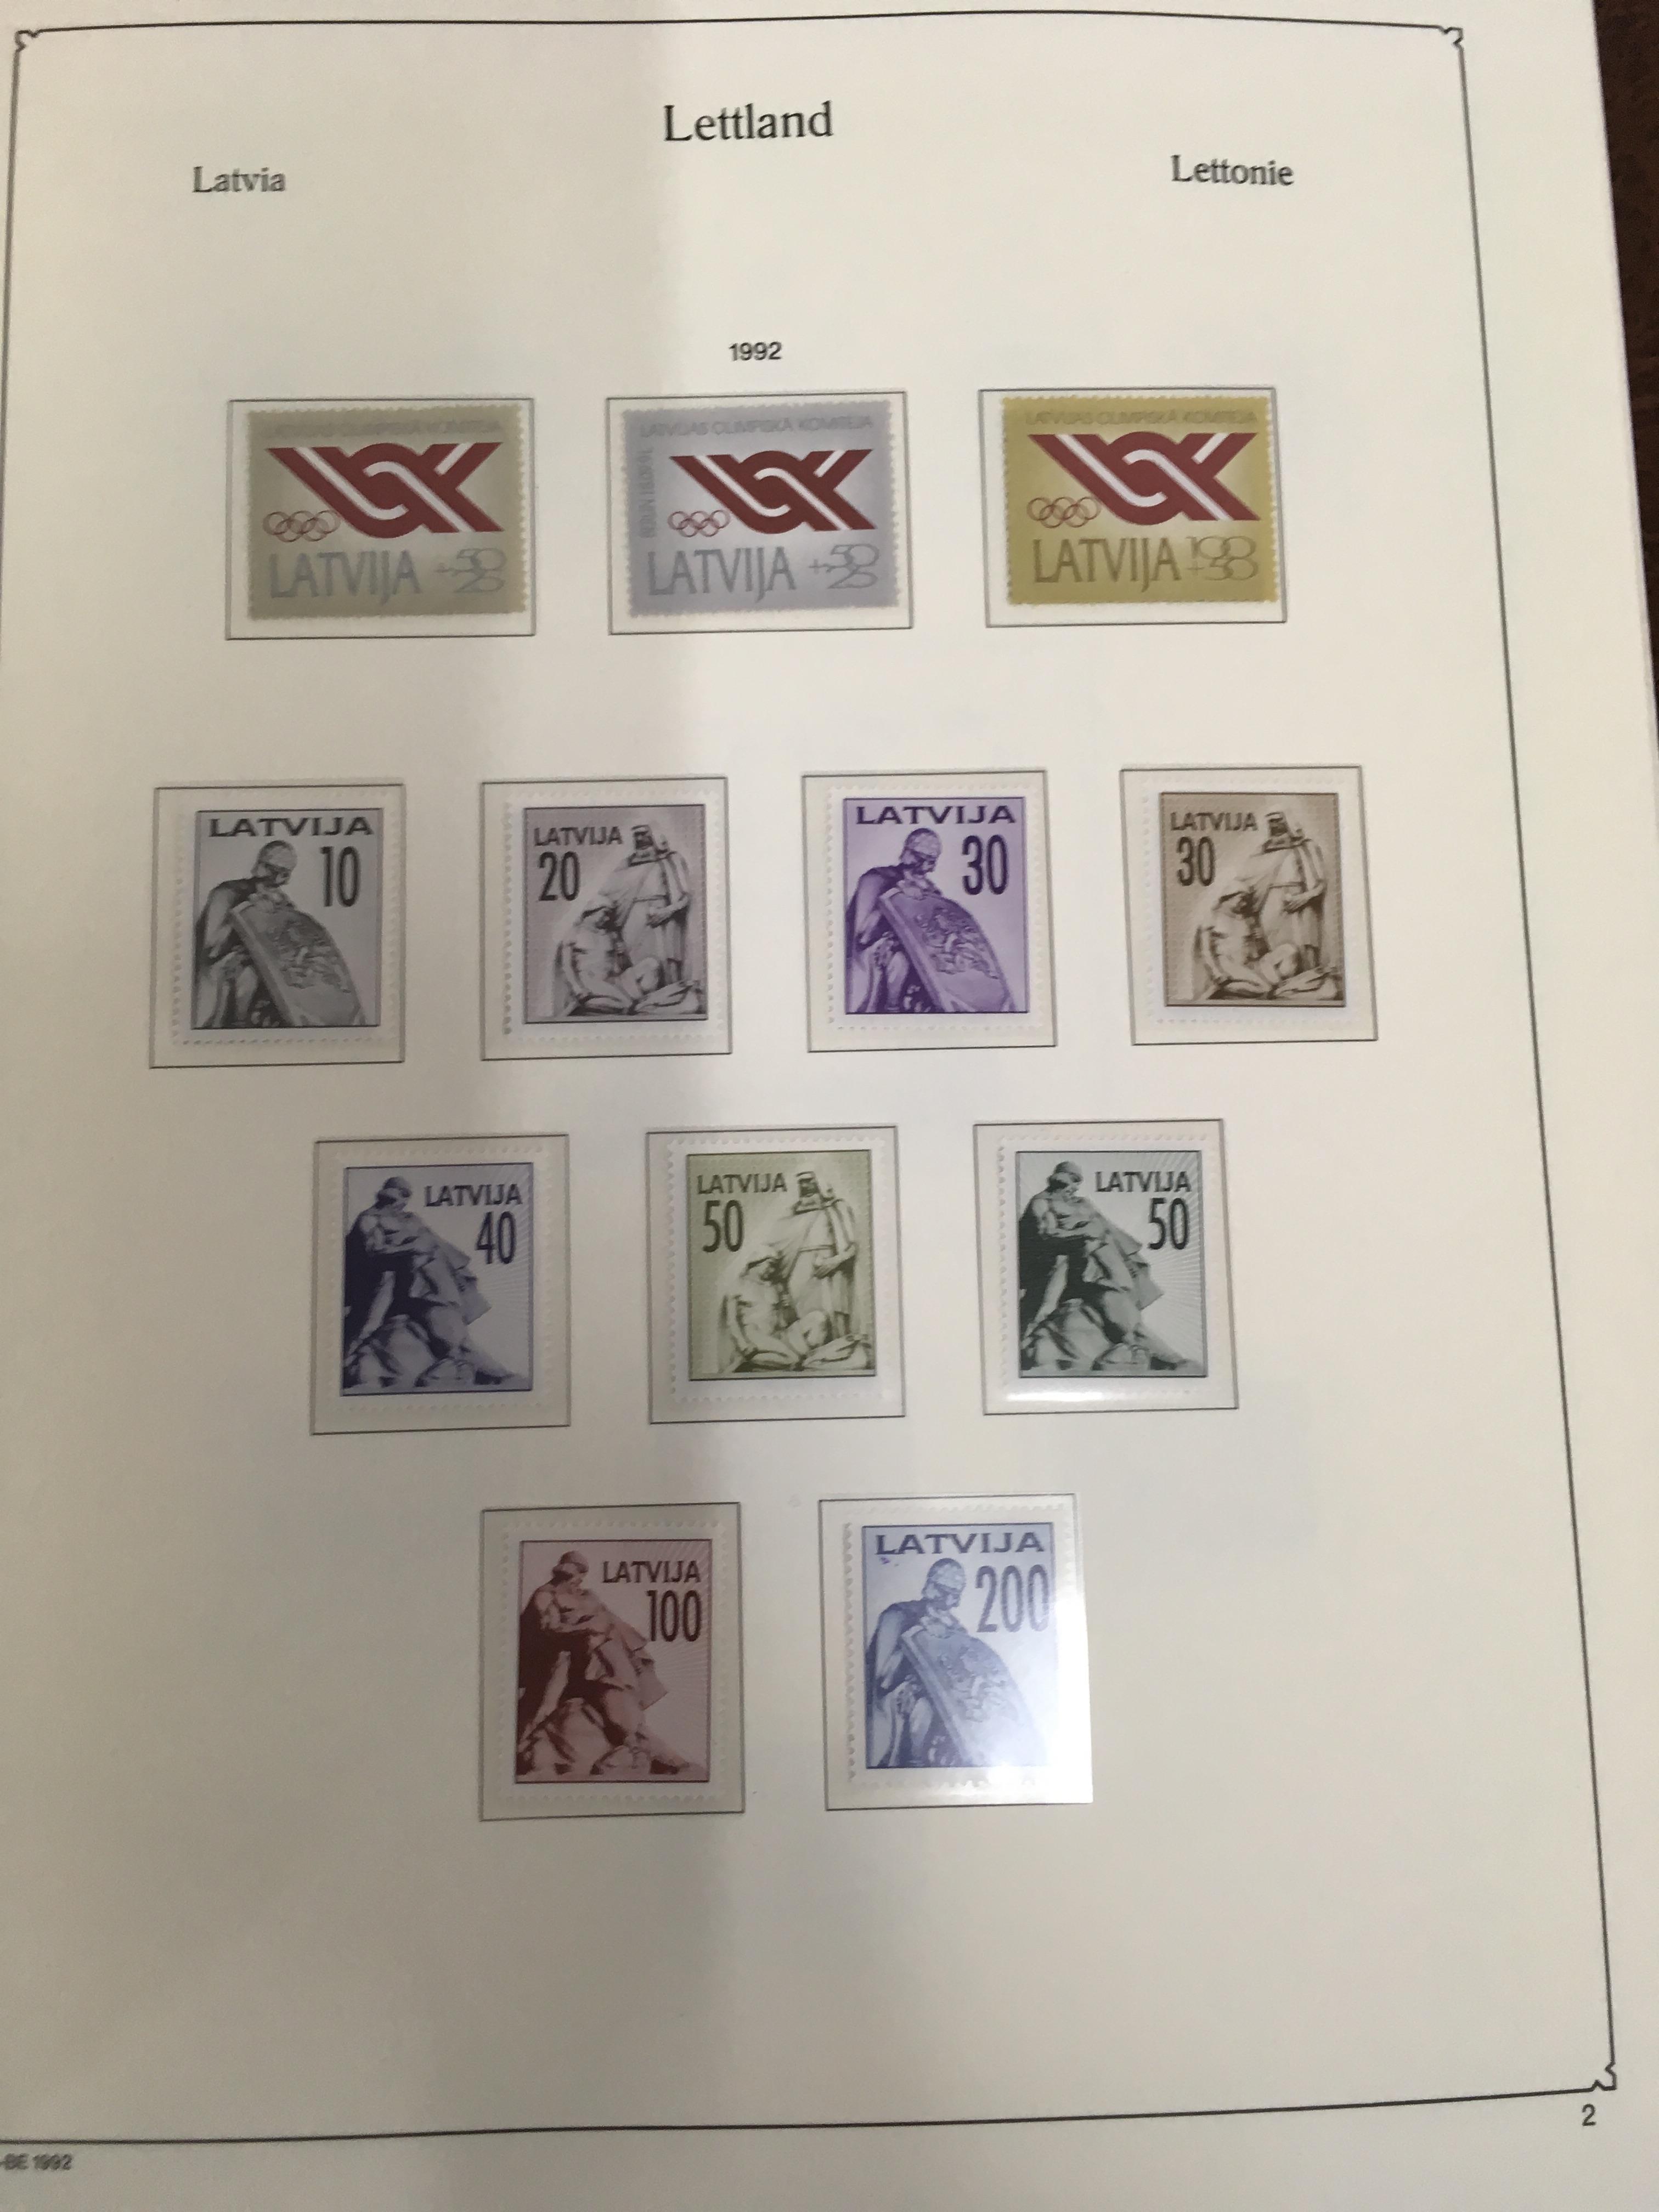 STAMPS: KA-BE ALBUM WITH A COLLECTION MINT LATVIA, LITHUANIA AND ESTONIA 1991-9 ISSUES. - Image 33 of 45